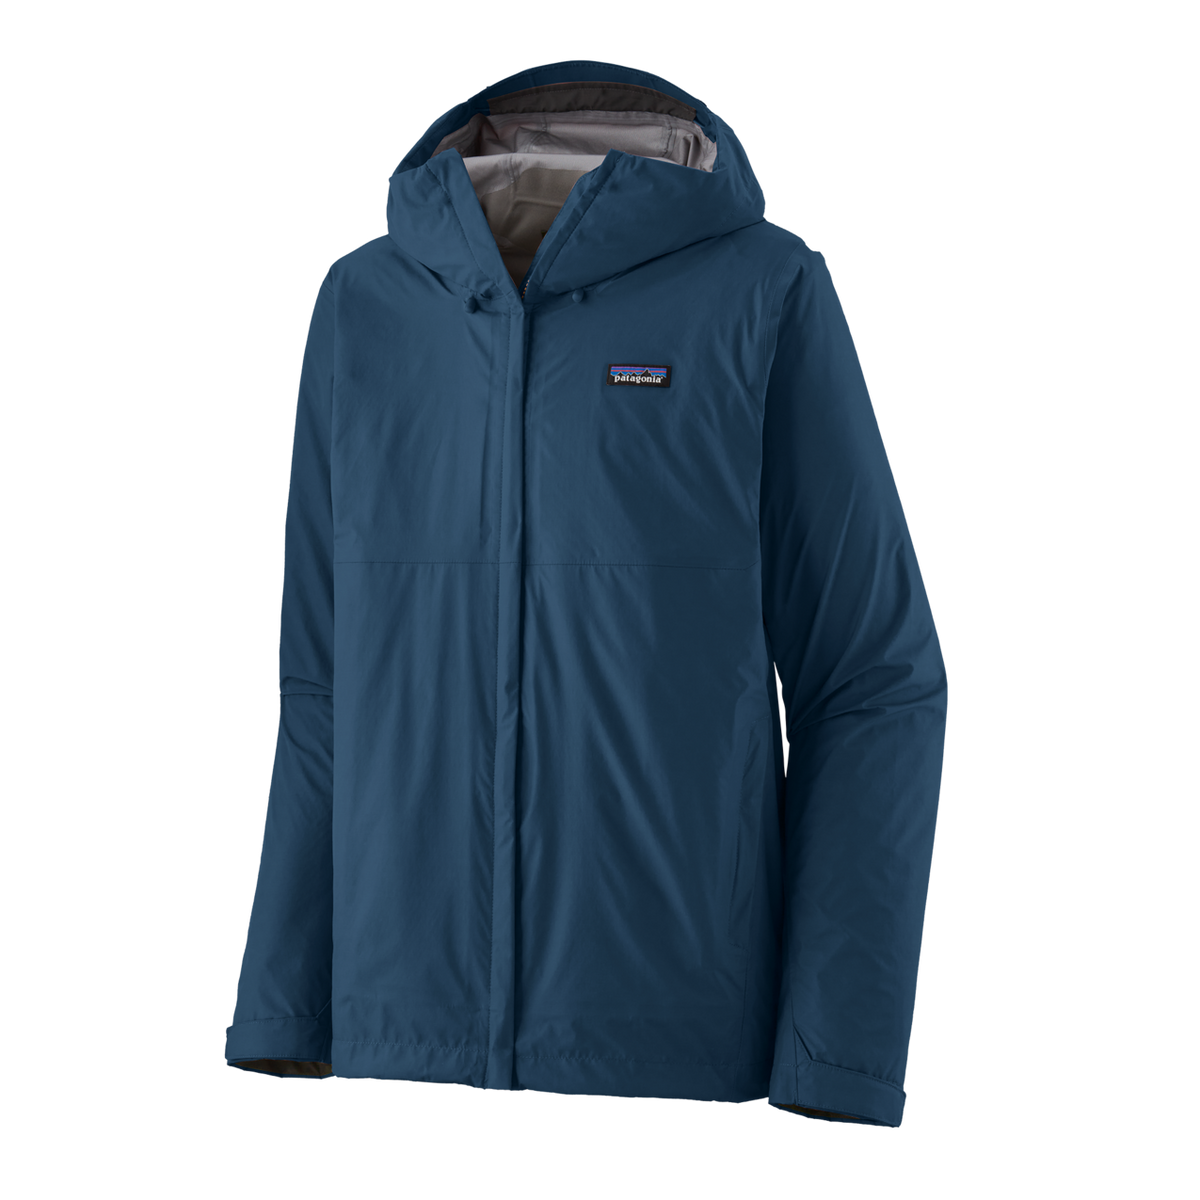 Fluorinated DWR (Durable Water Repellent) Finish - Patagonia